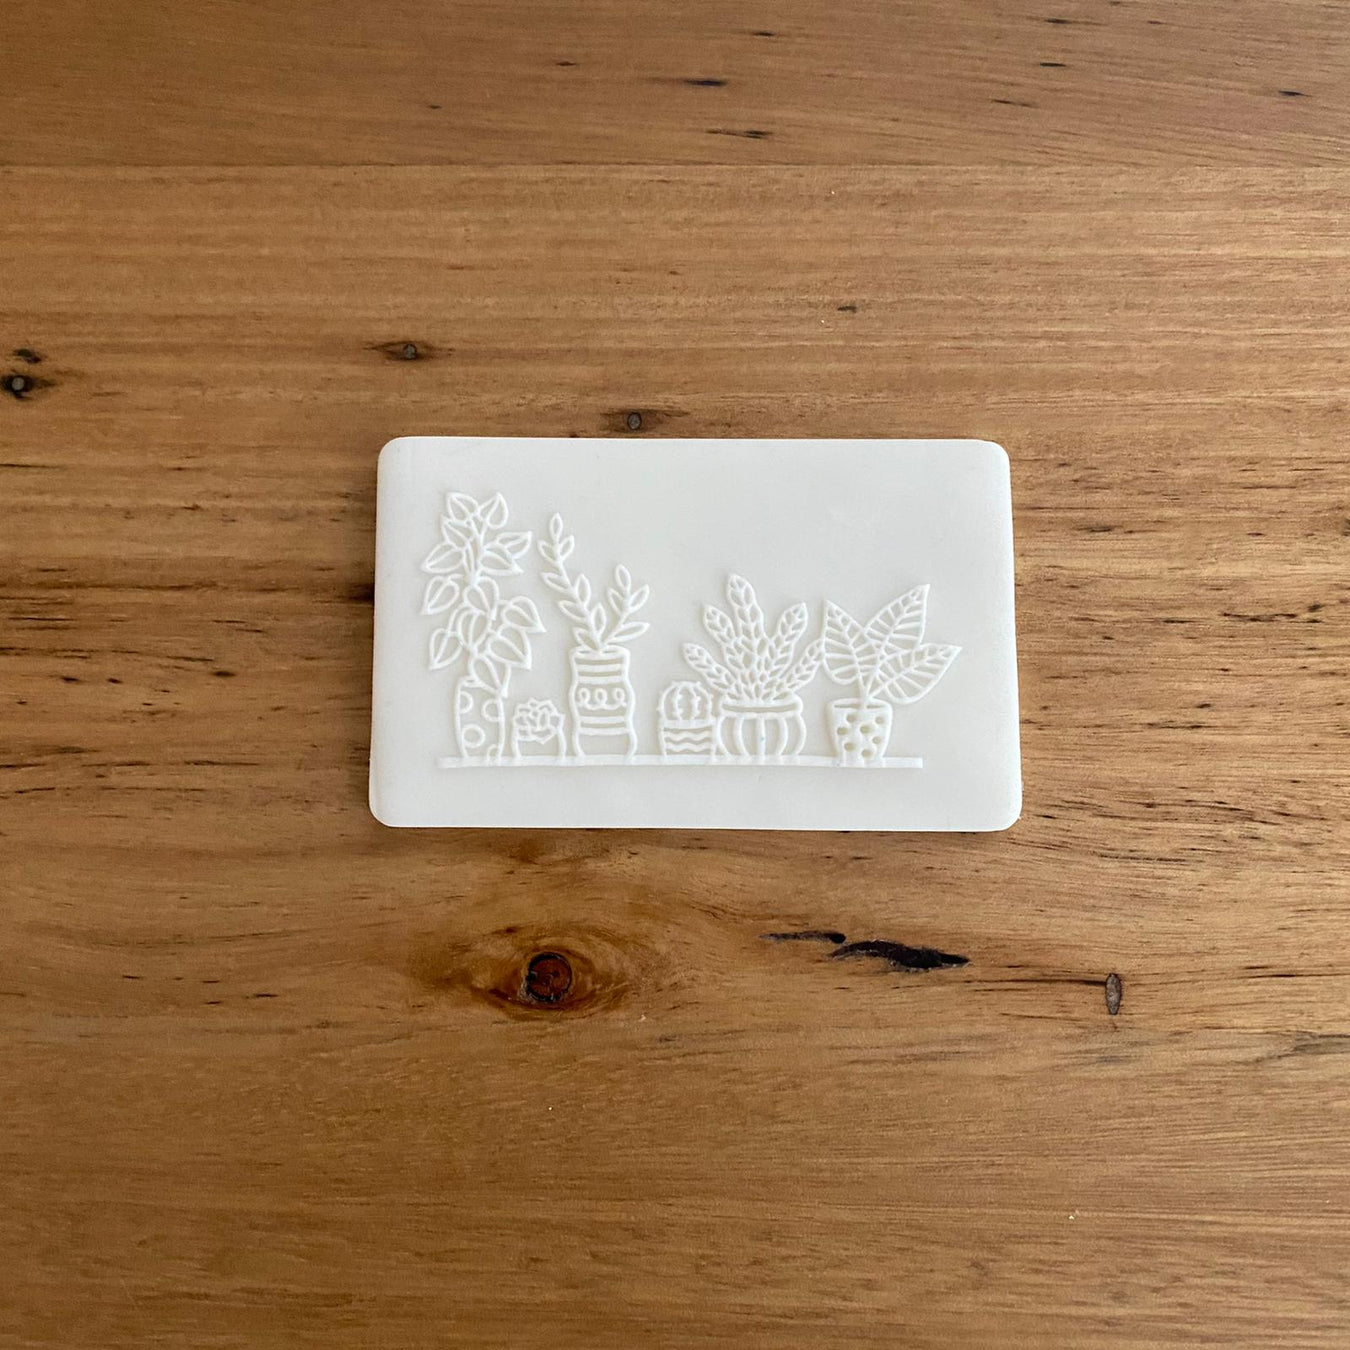 Flowers and Nature Raised Stamp, Pop Stamp, Deboss Cookie Stamp, Cookie Cutter Store